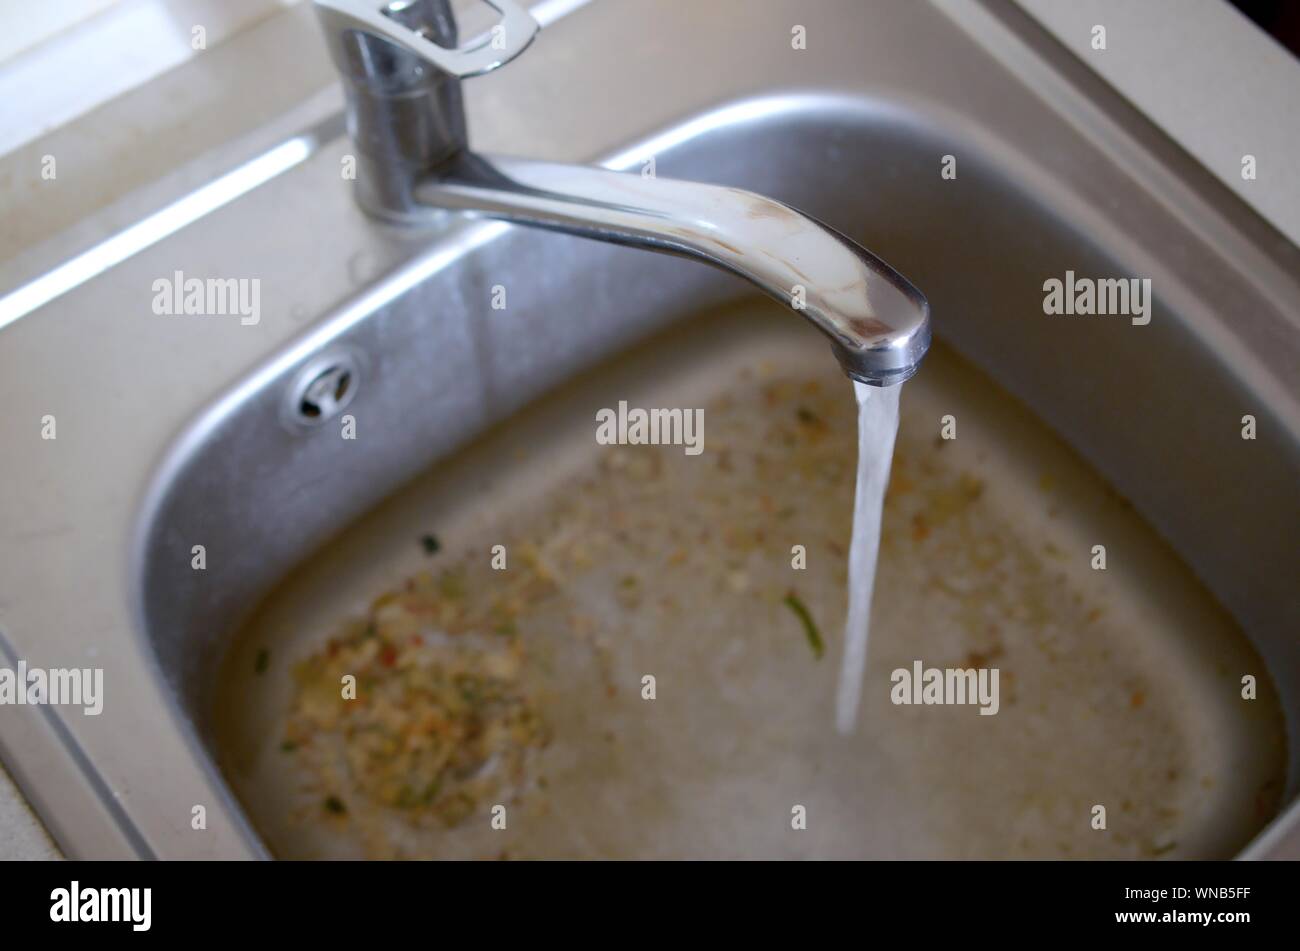 Stainless Steel Sink Plug Hole Close Up Full Of Water And